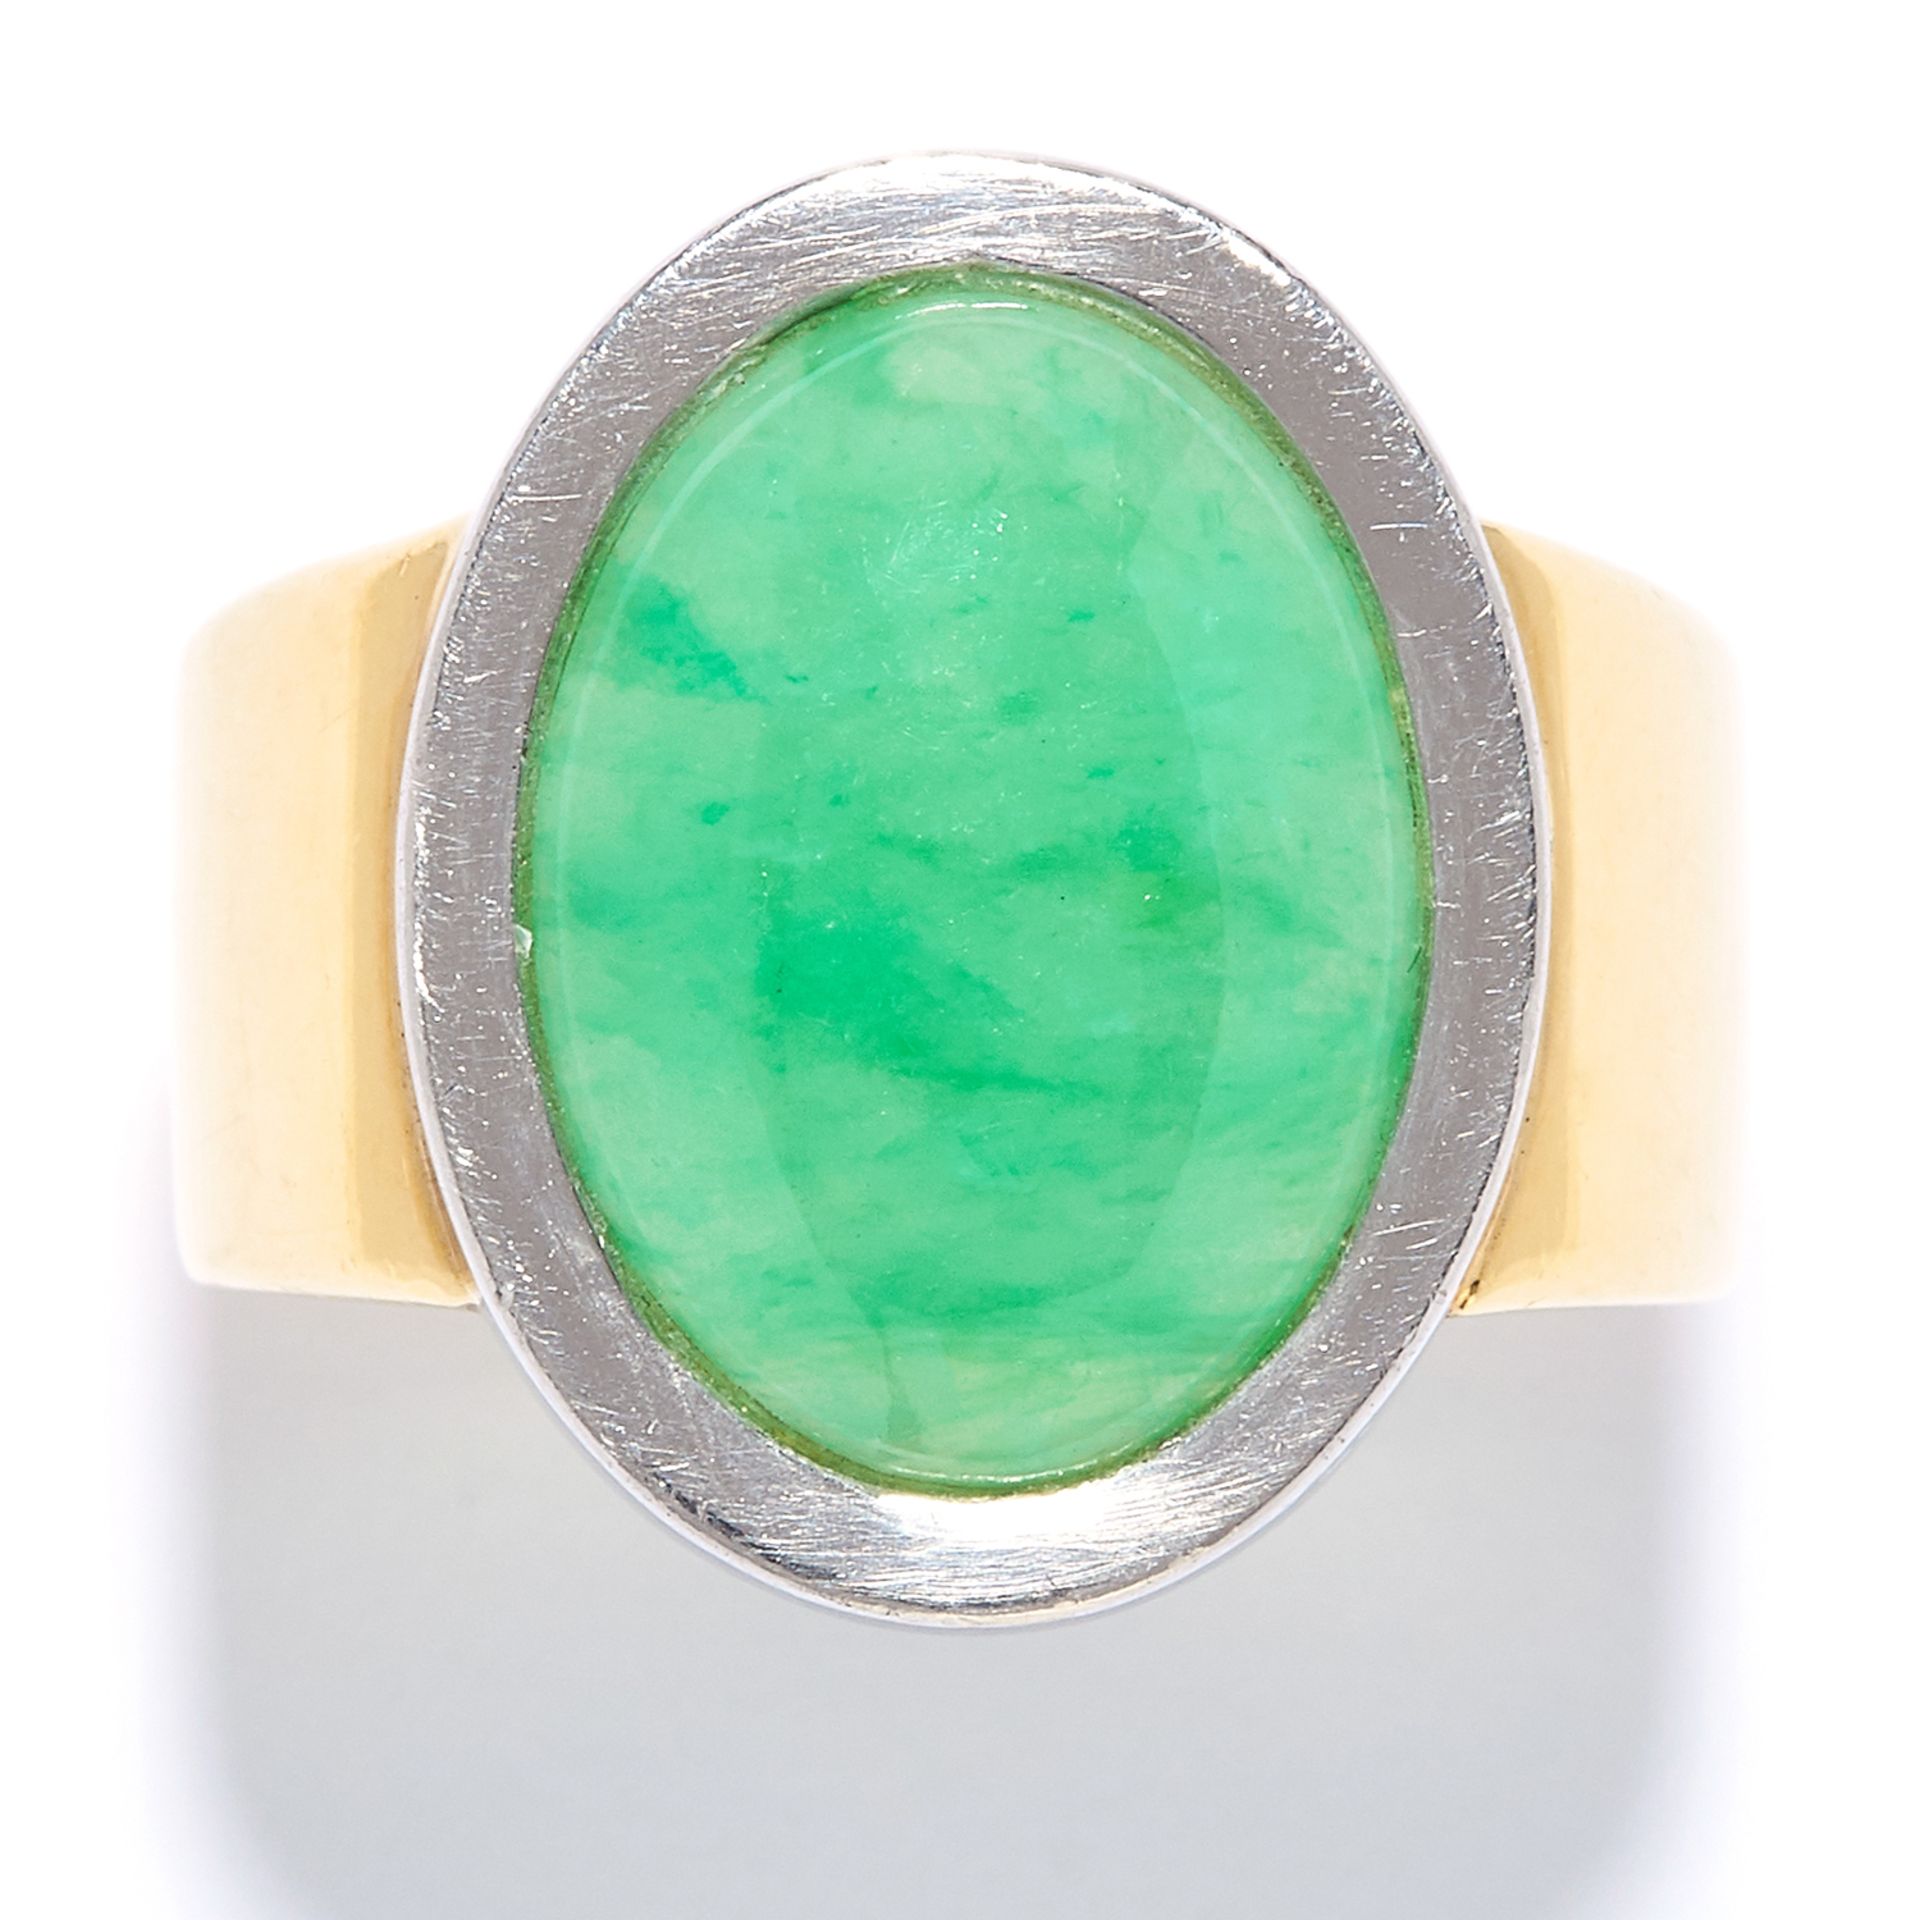 A JADEITE JADE DRESS RING set with an oval jade cabochon of 7.50 carats, size R / 8.5, 16.2g.